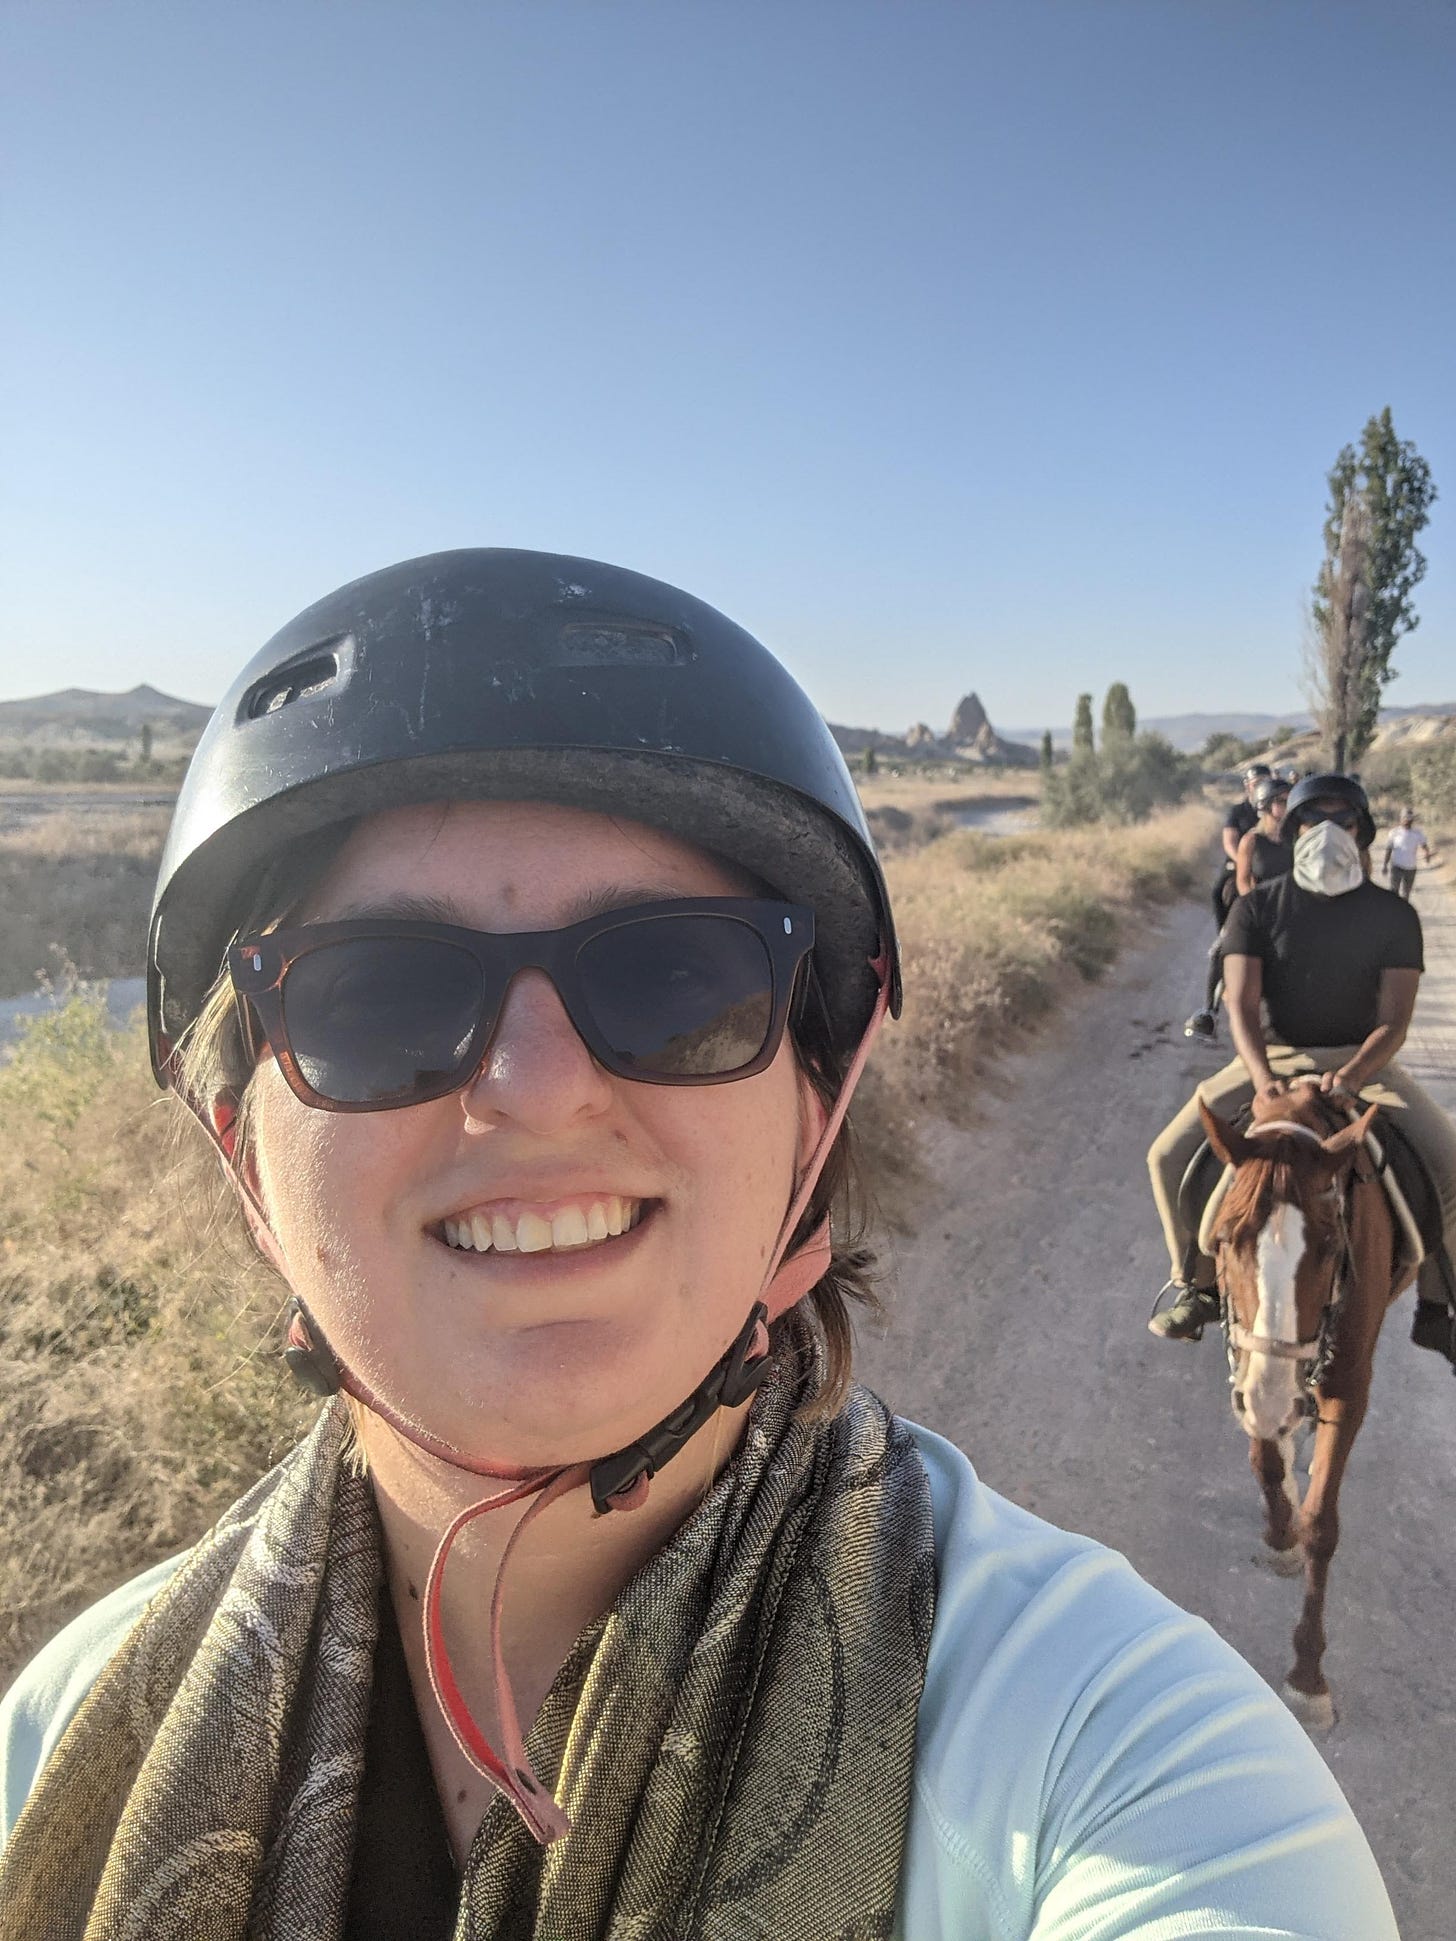 Selfie on horseback, wearing helmet, with a column of horses behind me, including Aseef riding a horse, and the Cappadocia landscape